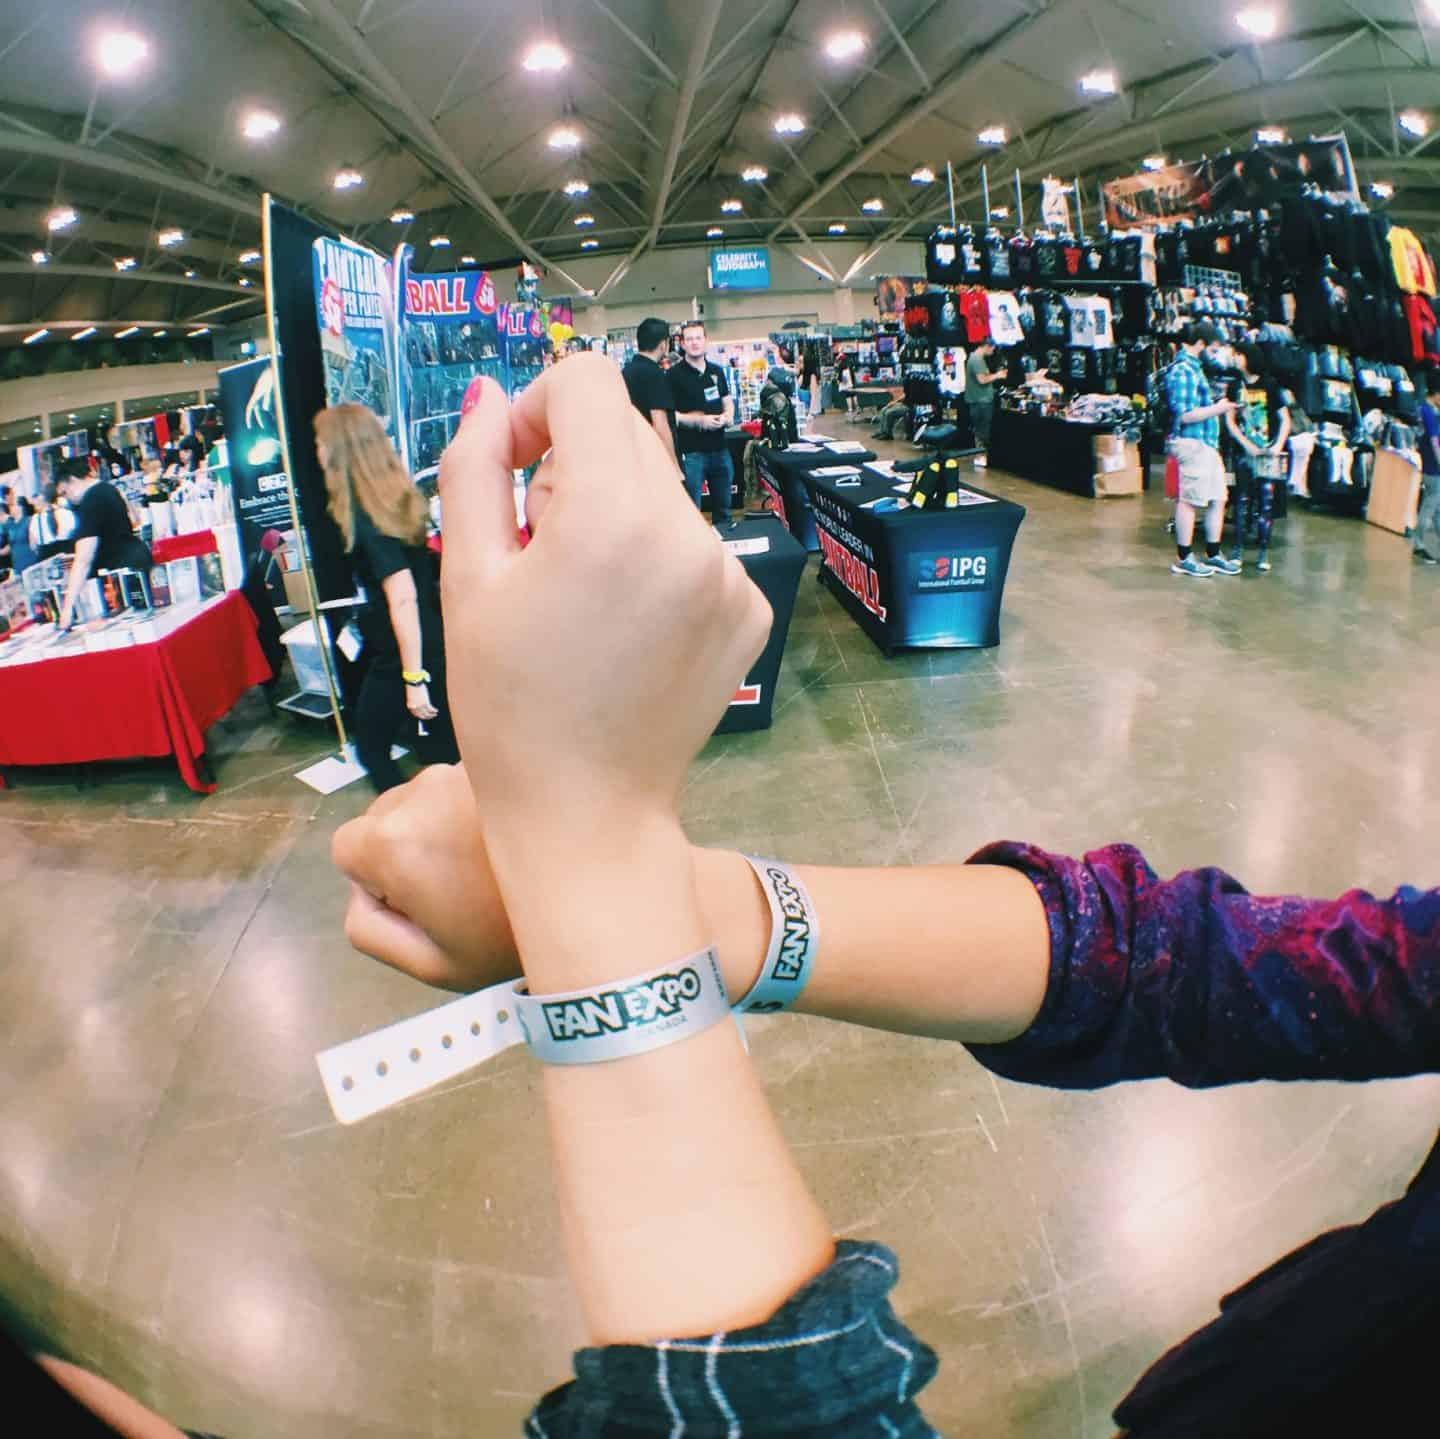 Wristbands for Fan Expo Canada at the Toronto Metro Convention Centre